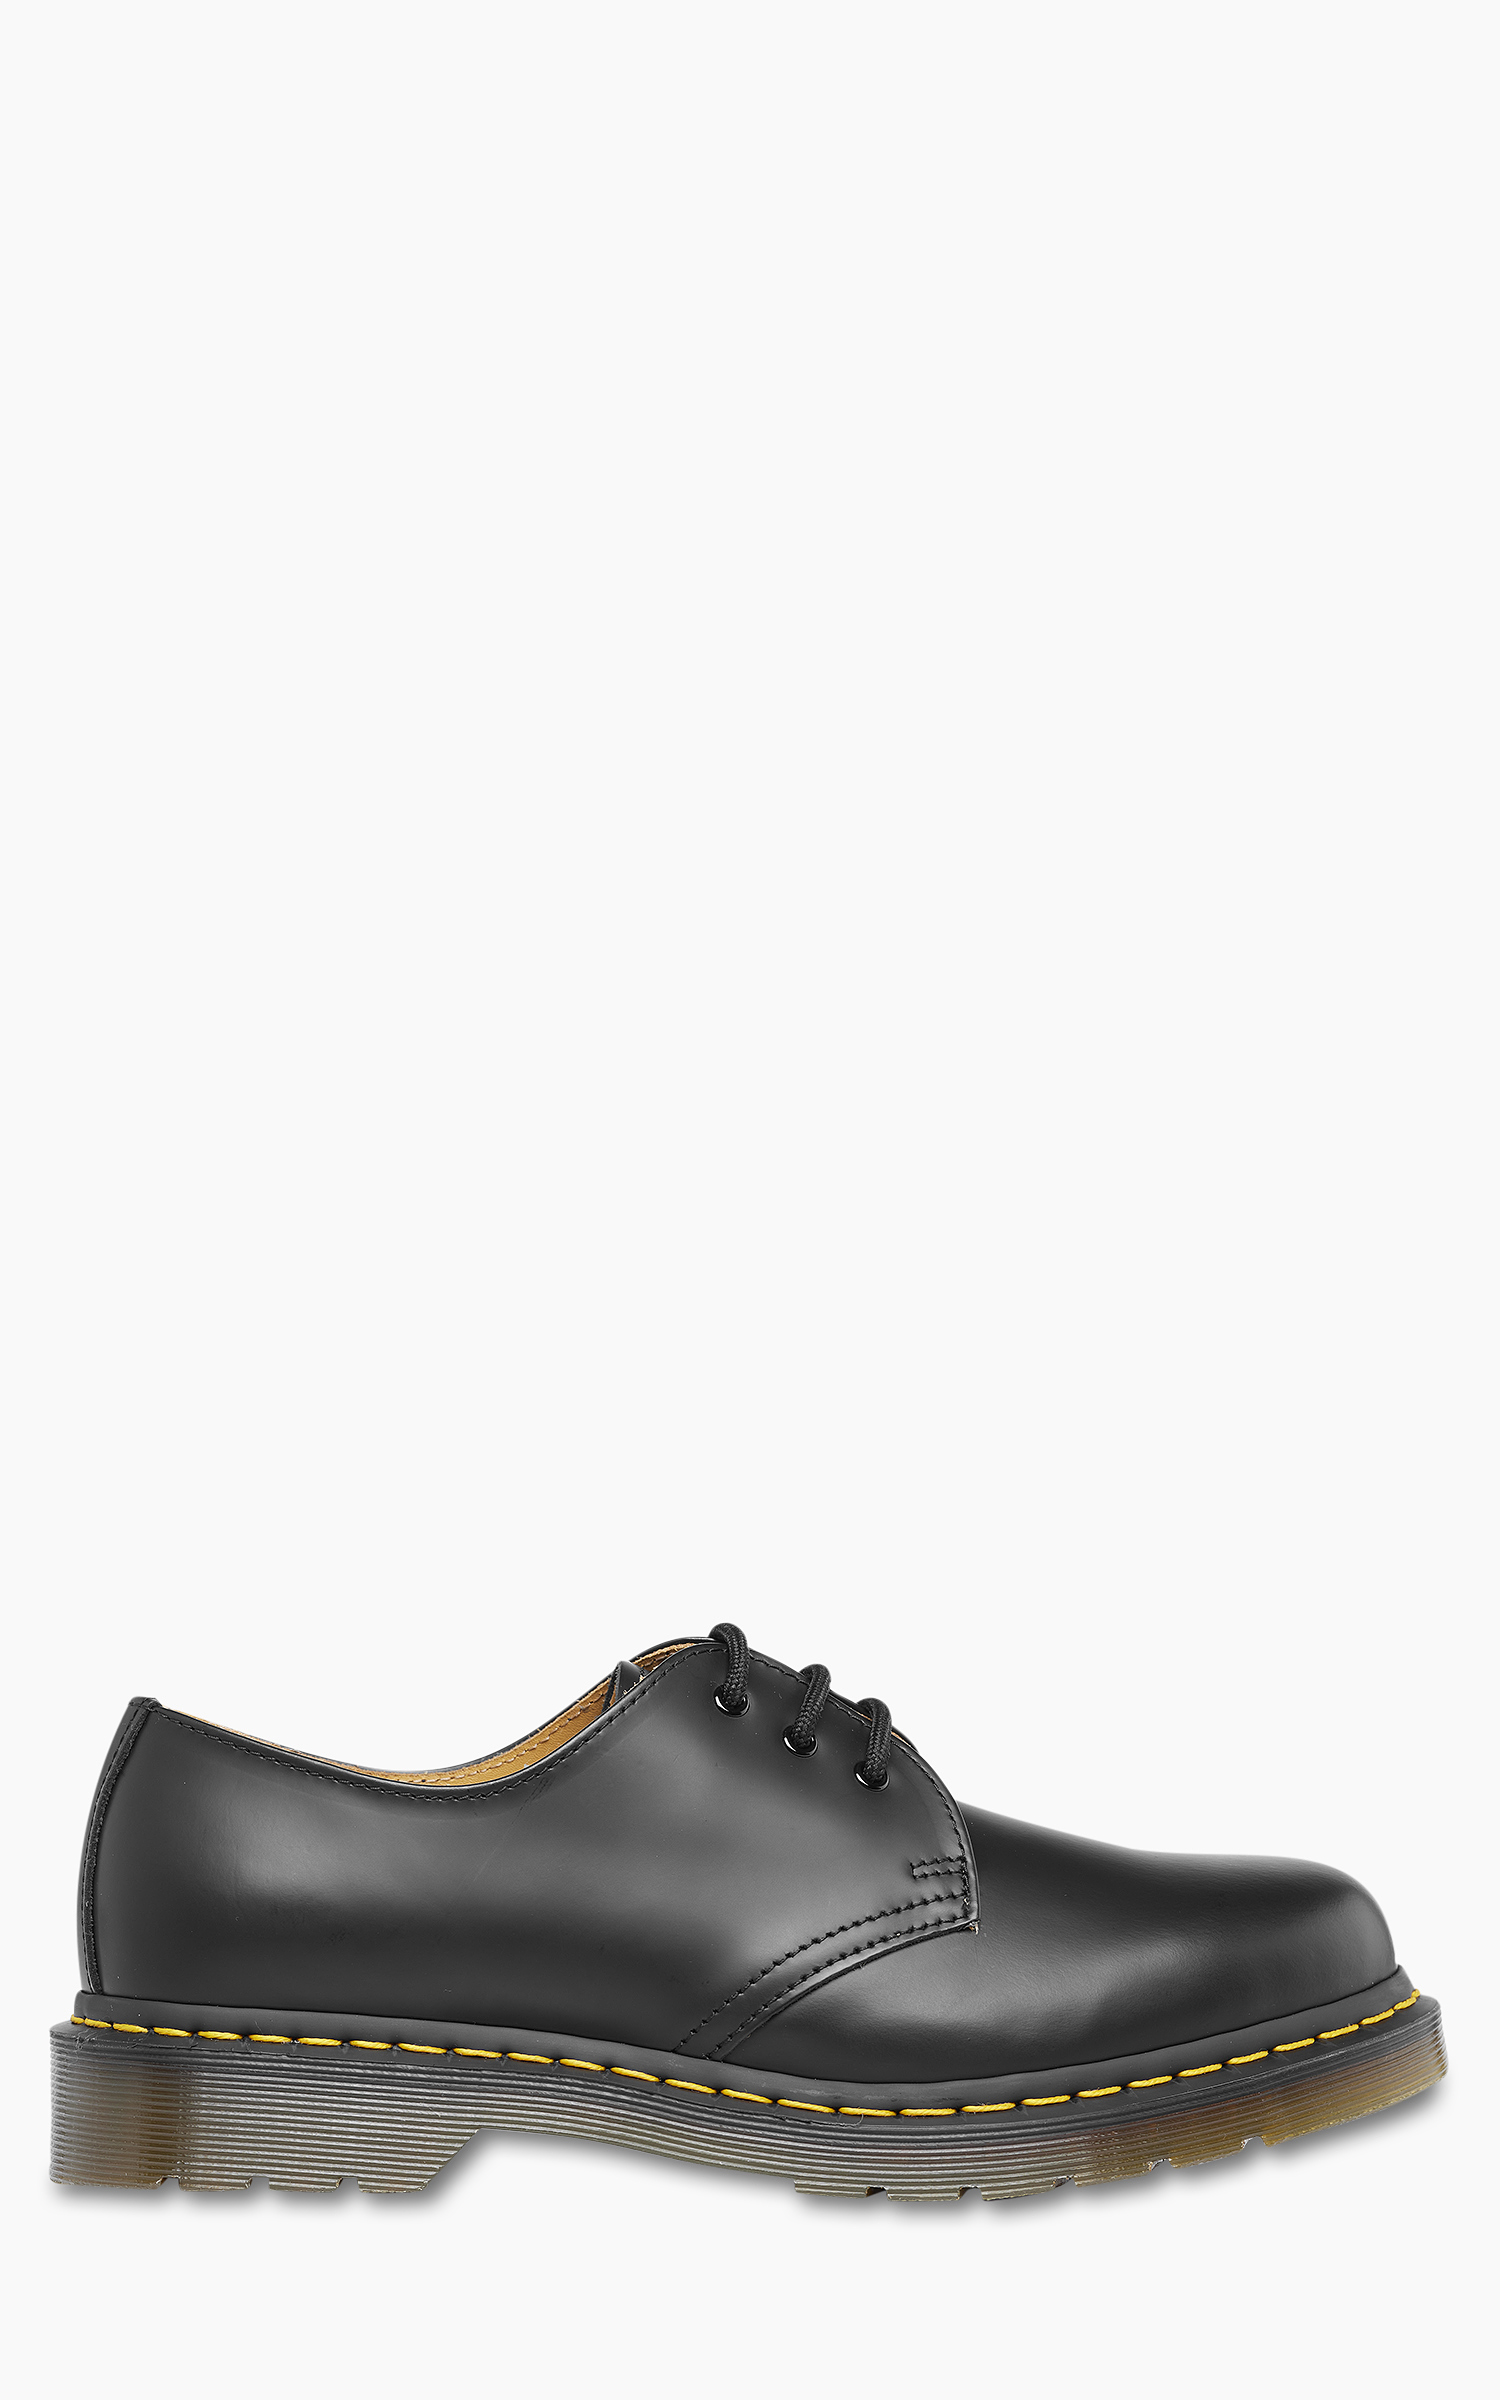 Dr. Martens 1461 Smooth Leather Oxford Shoes Black | Cultizm